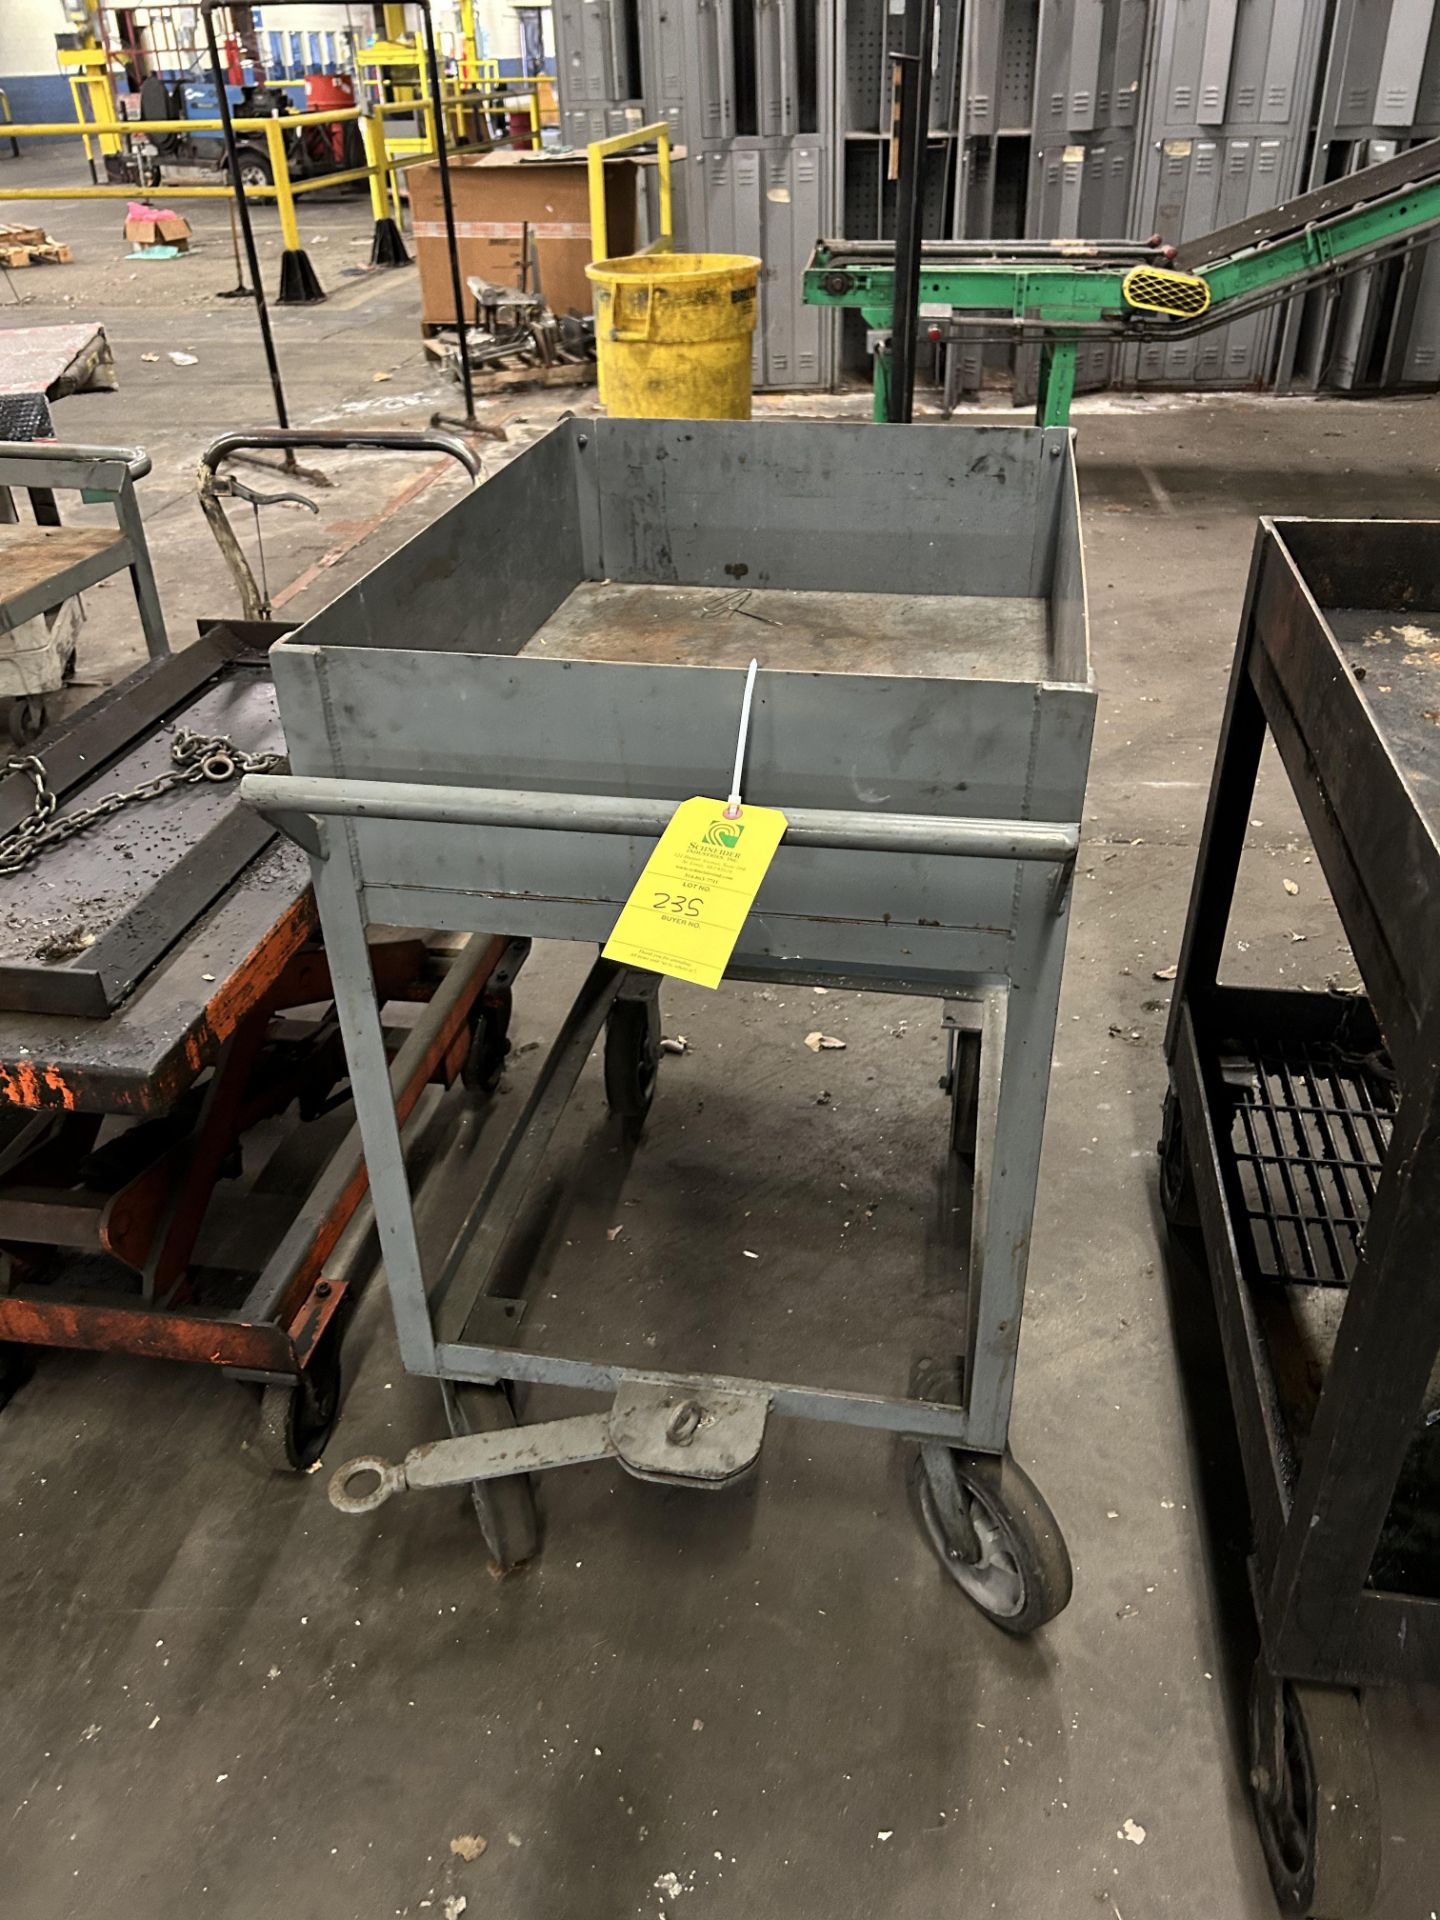 Shop Cart, Rigging/ Removal Fee - $35